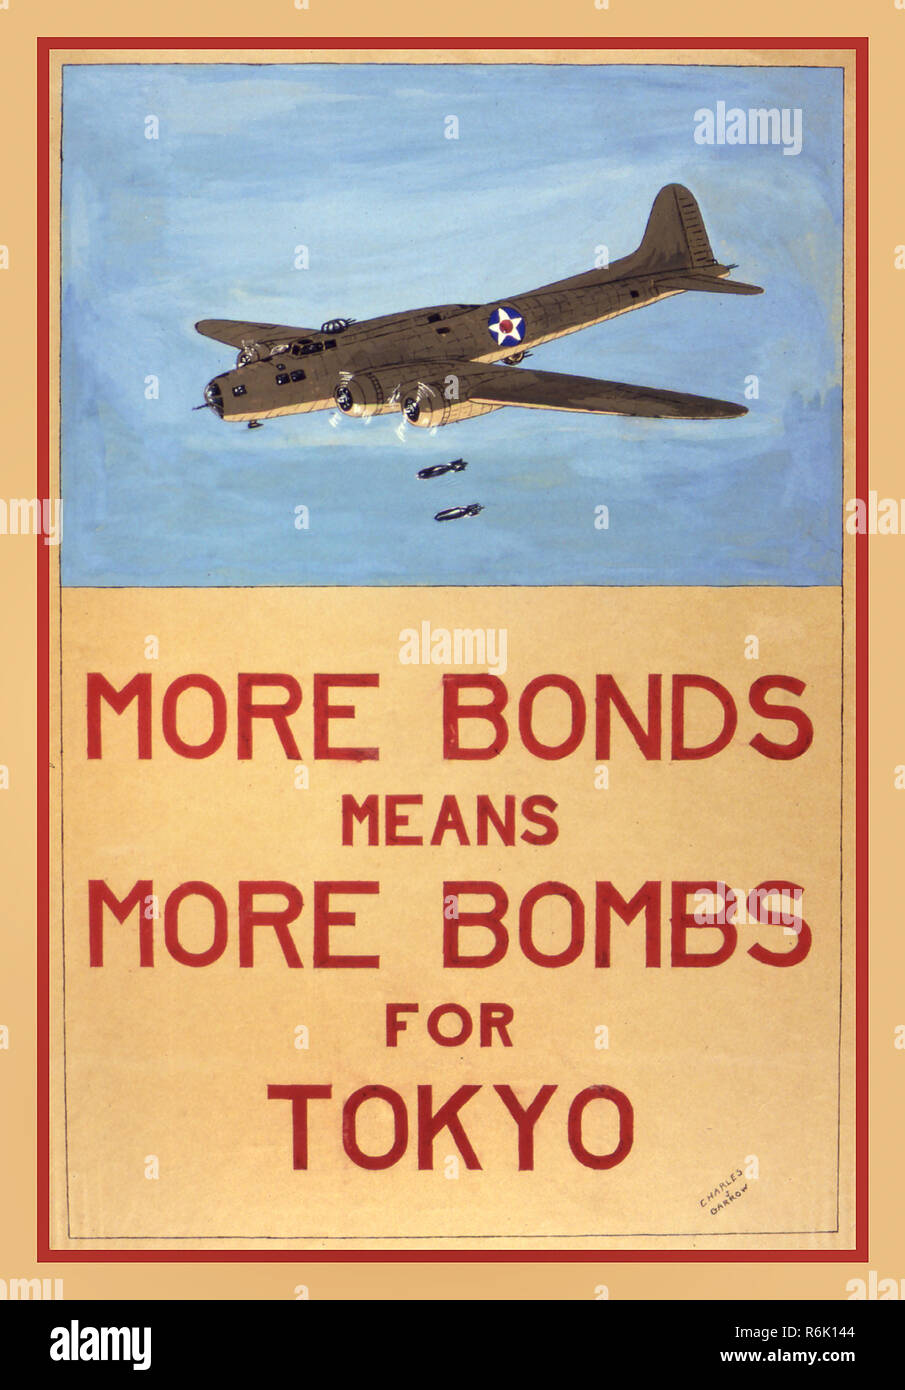 Vintage WW2 American Japanese War propaganda poster USA Office for Emergency Management. War Production Board. “More Bonds Means More Bombs For Tokyo” circa 1942 featuring an American B17 Bomber Aircraft dropping bombs on Tokyo Japan World War II. Pre-production Artwork Stock Photo